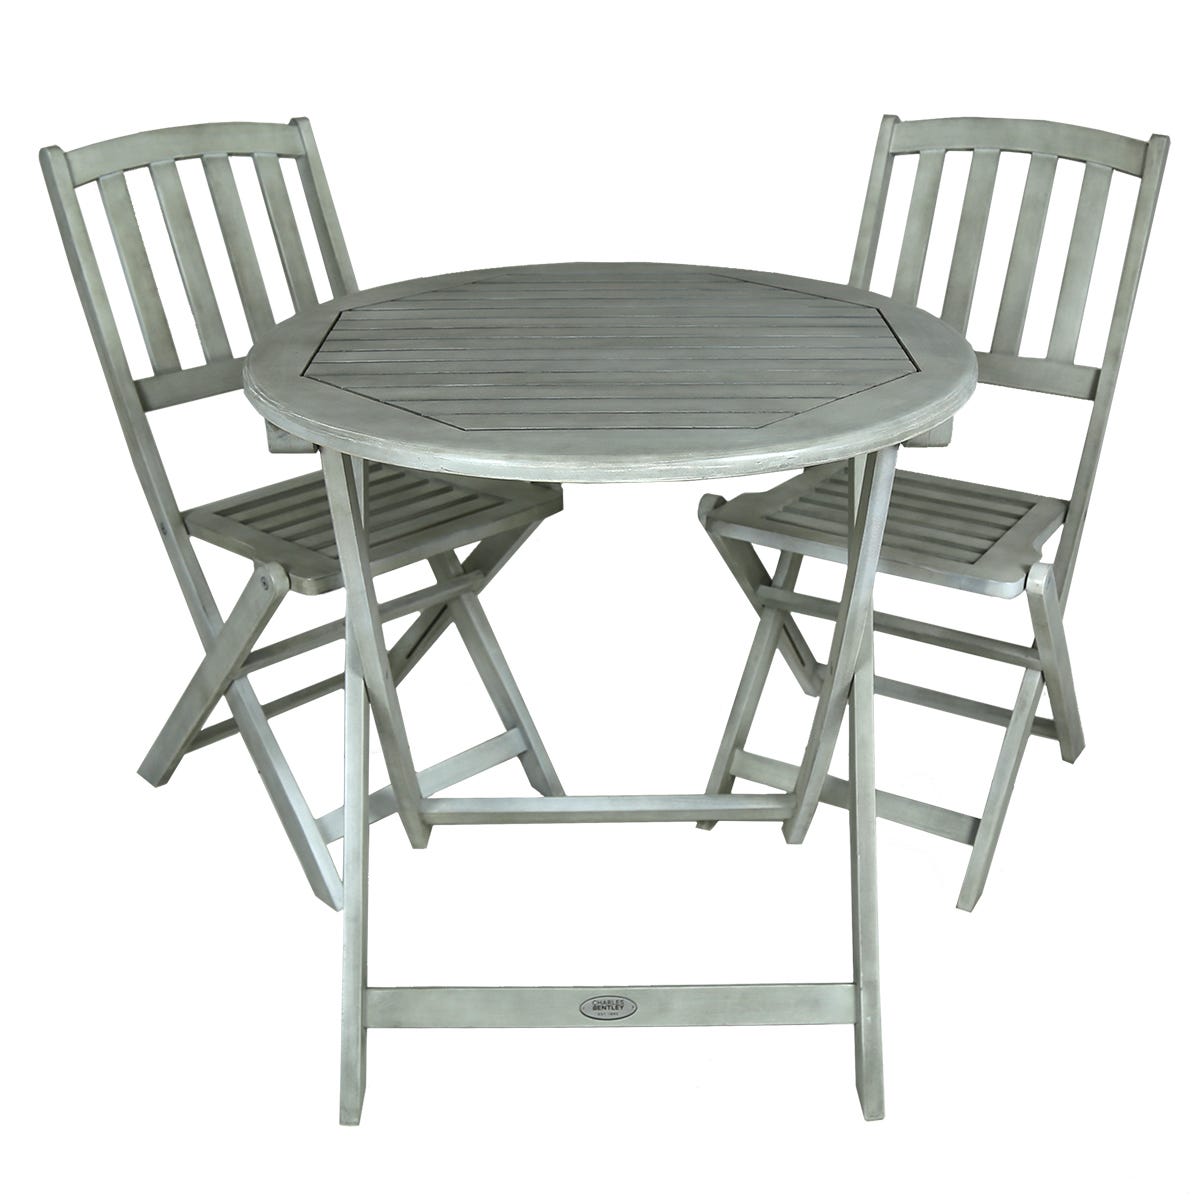 Charles Bentley Fsc174 Certified Acacia White Washed Wooden Bistro Set